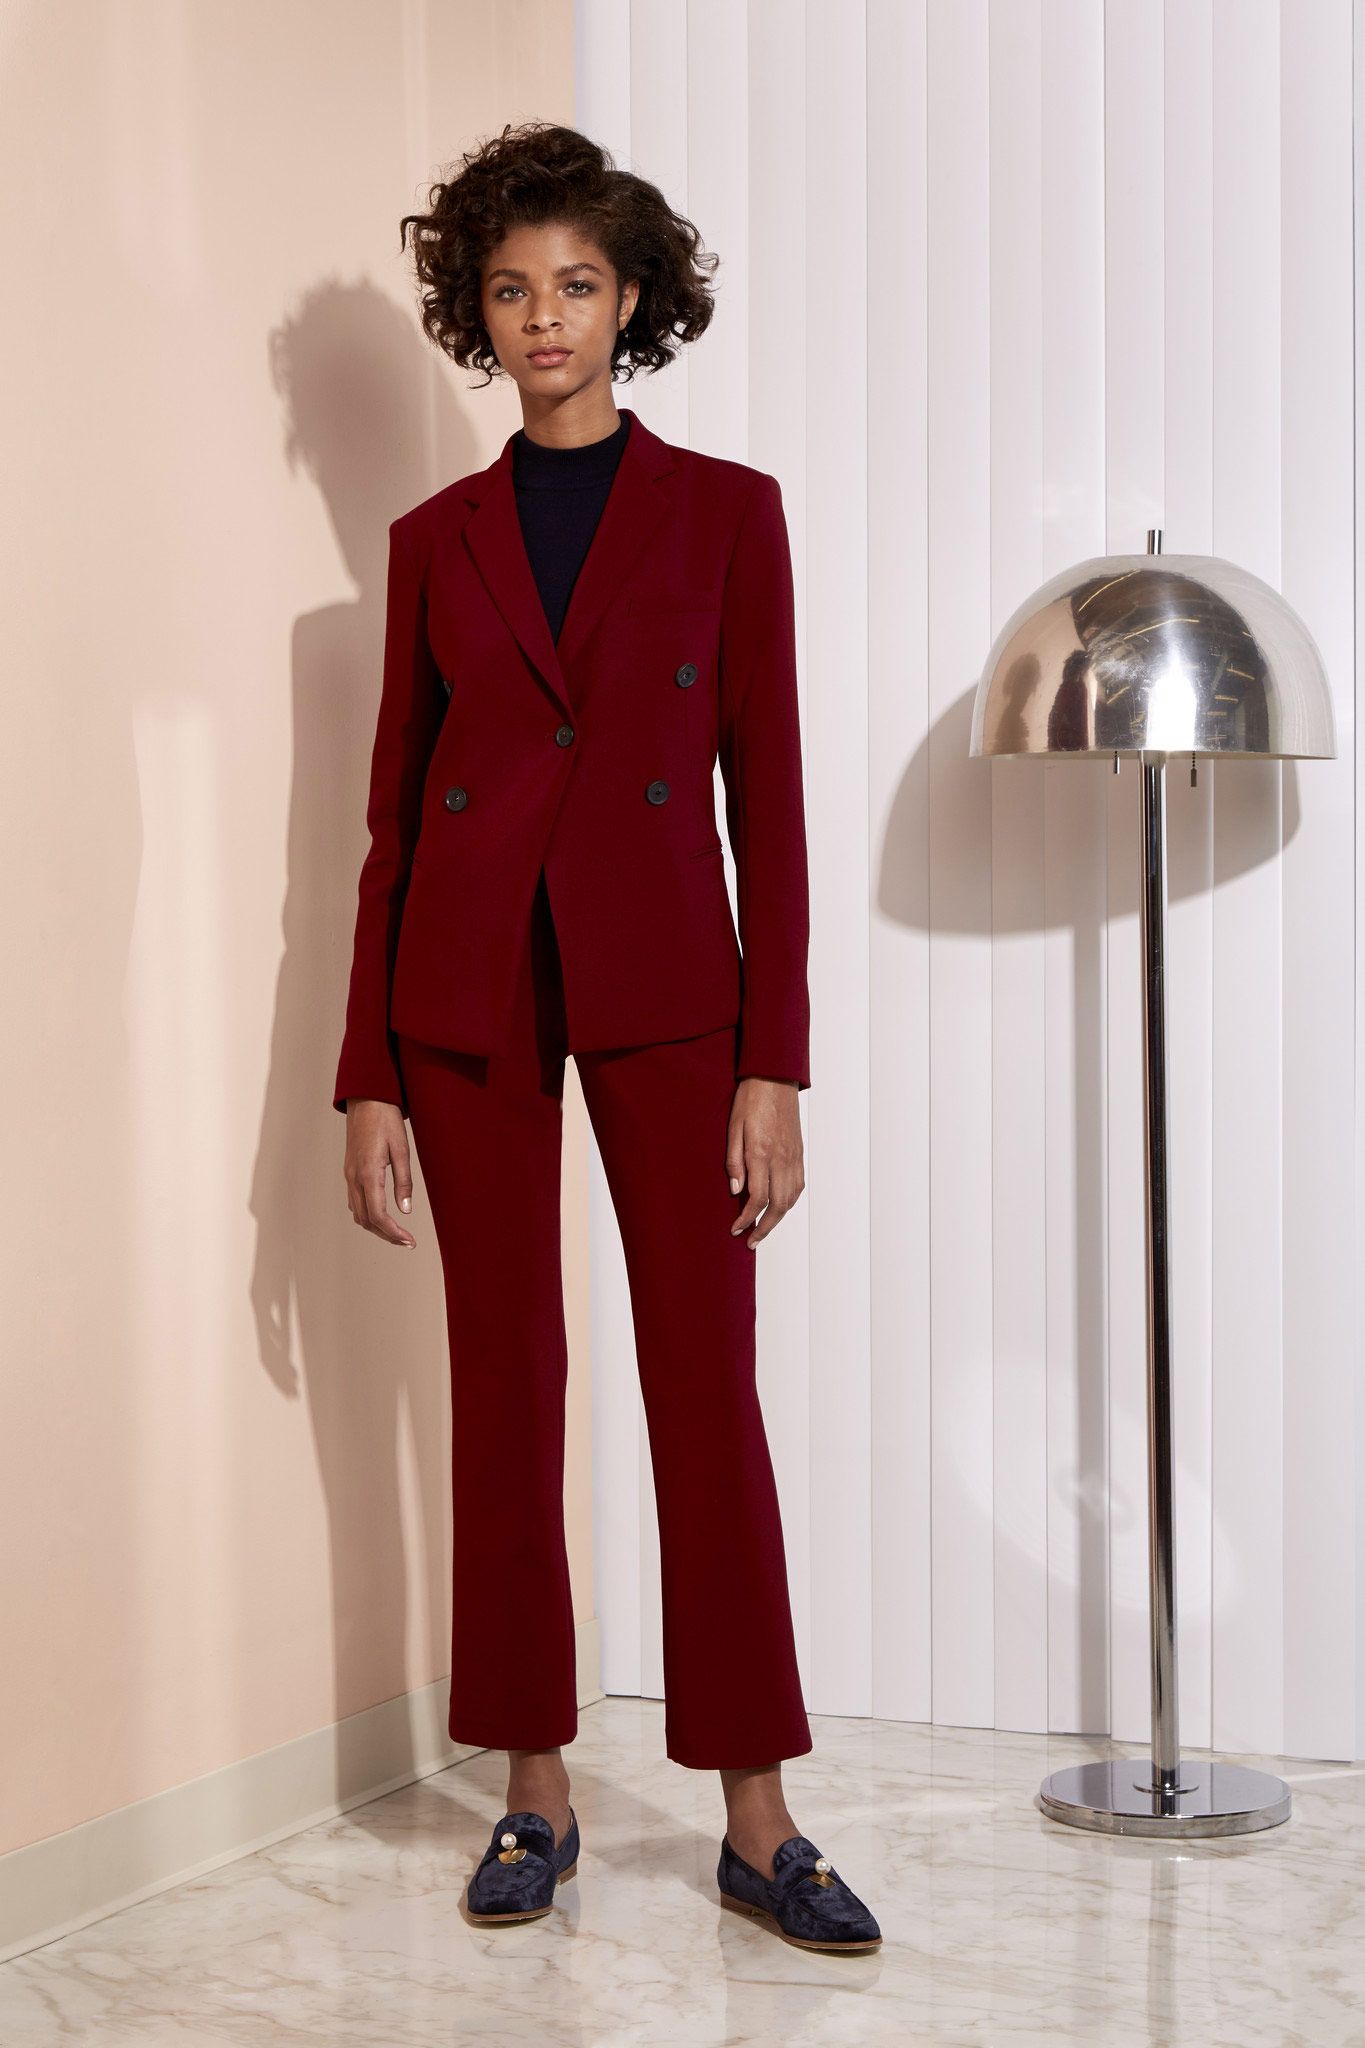 Workwear Brand Argent Has Designed Two Suits in One